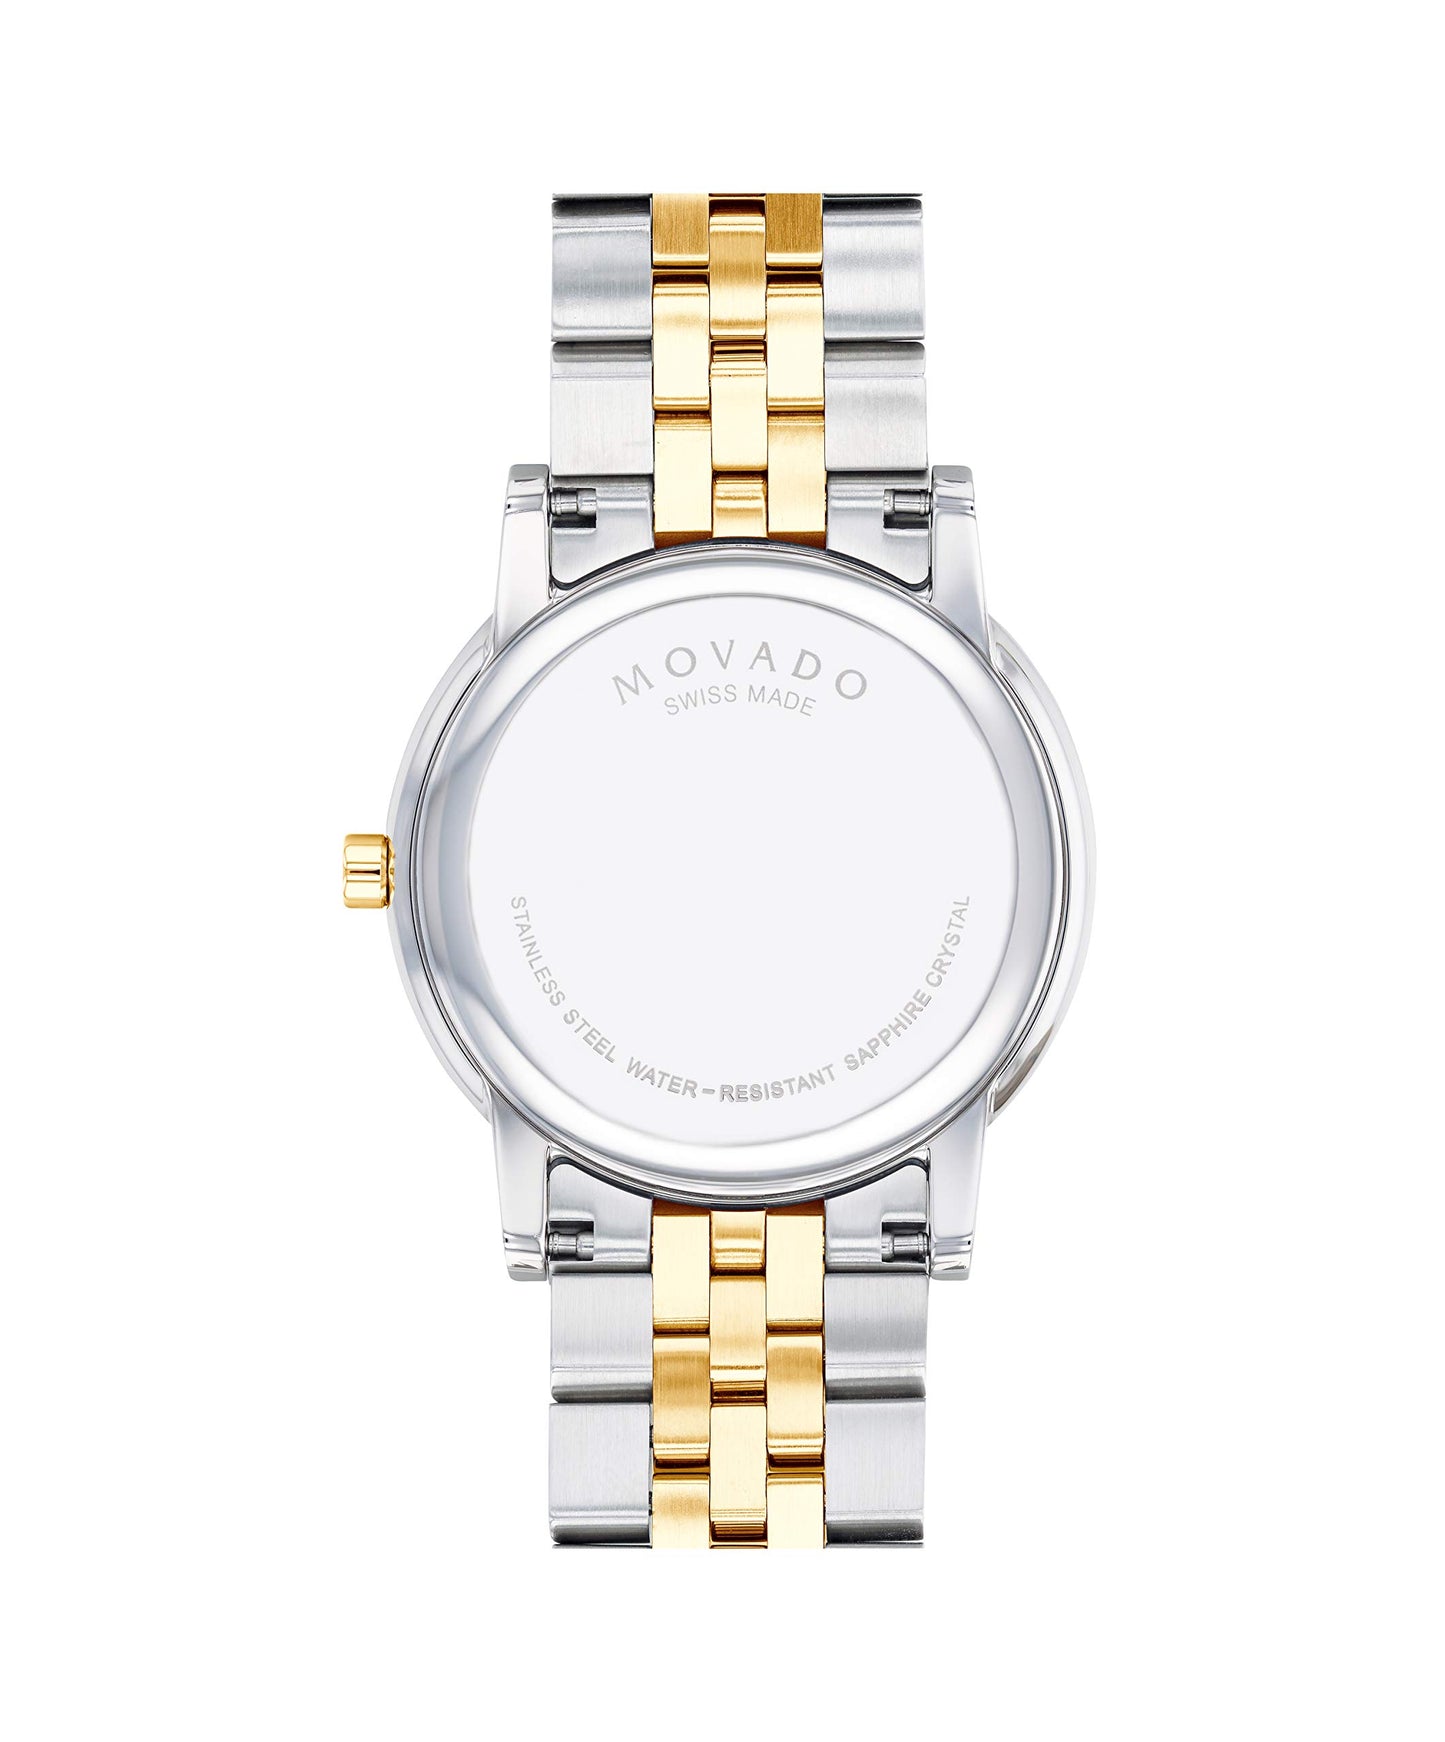 Movado Men's Museum Two Tone Watch with a Concave Dot Museum Dial, Gold/Silver/Black (Model 607200)